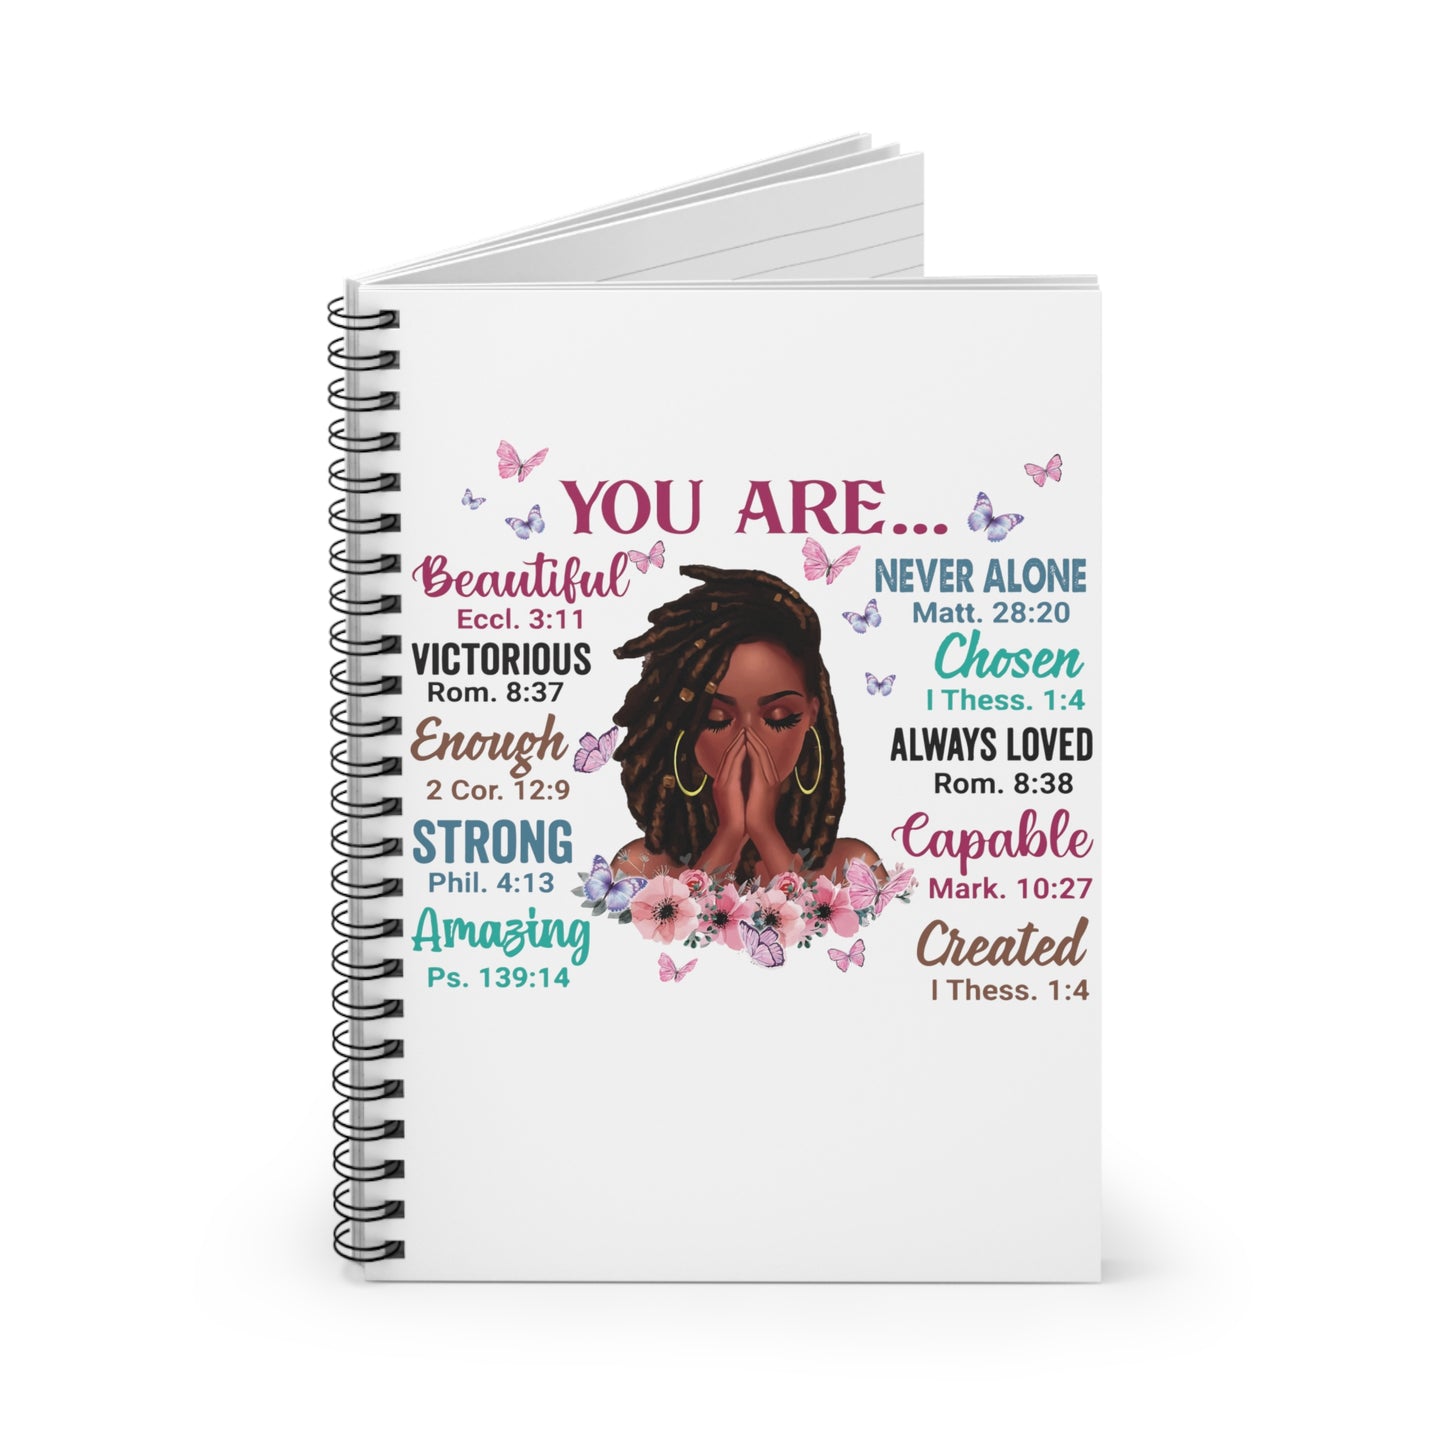 God Says You Are Inspirational Spiral Notebook - Ruled Line